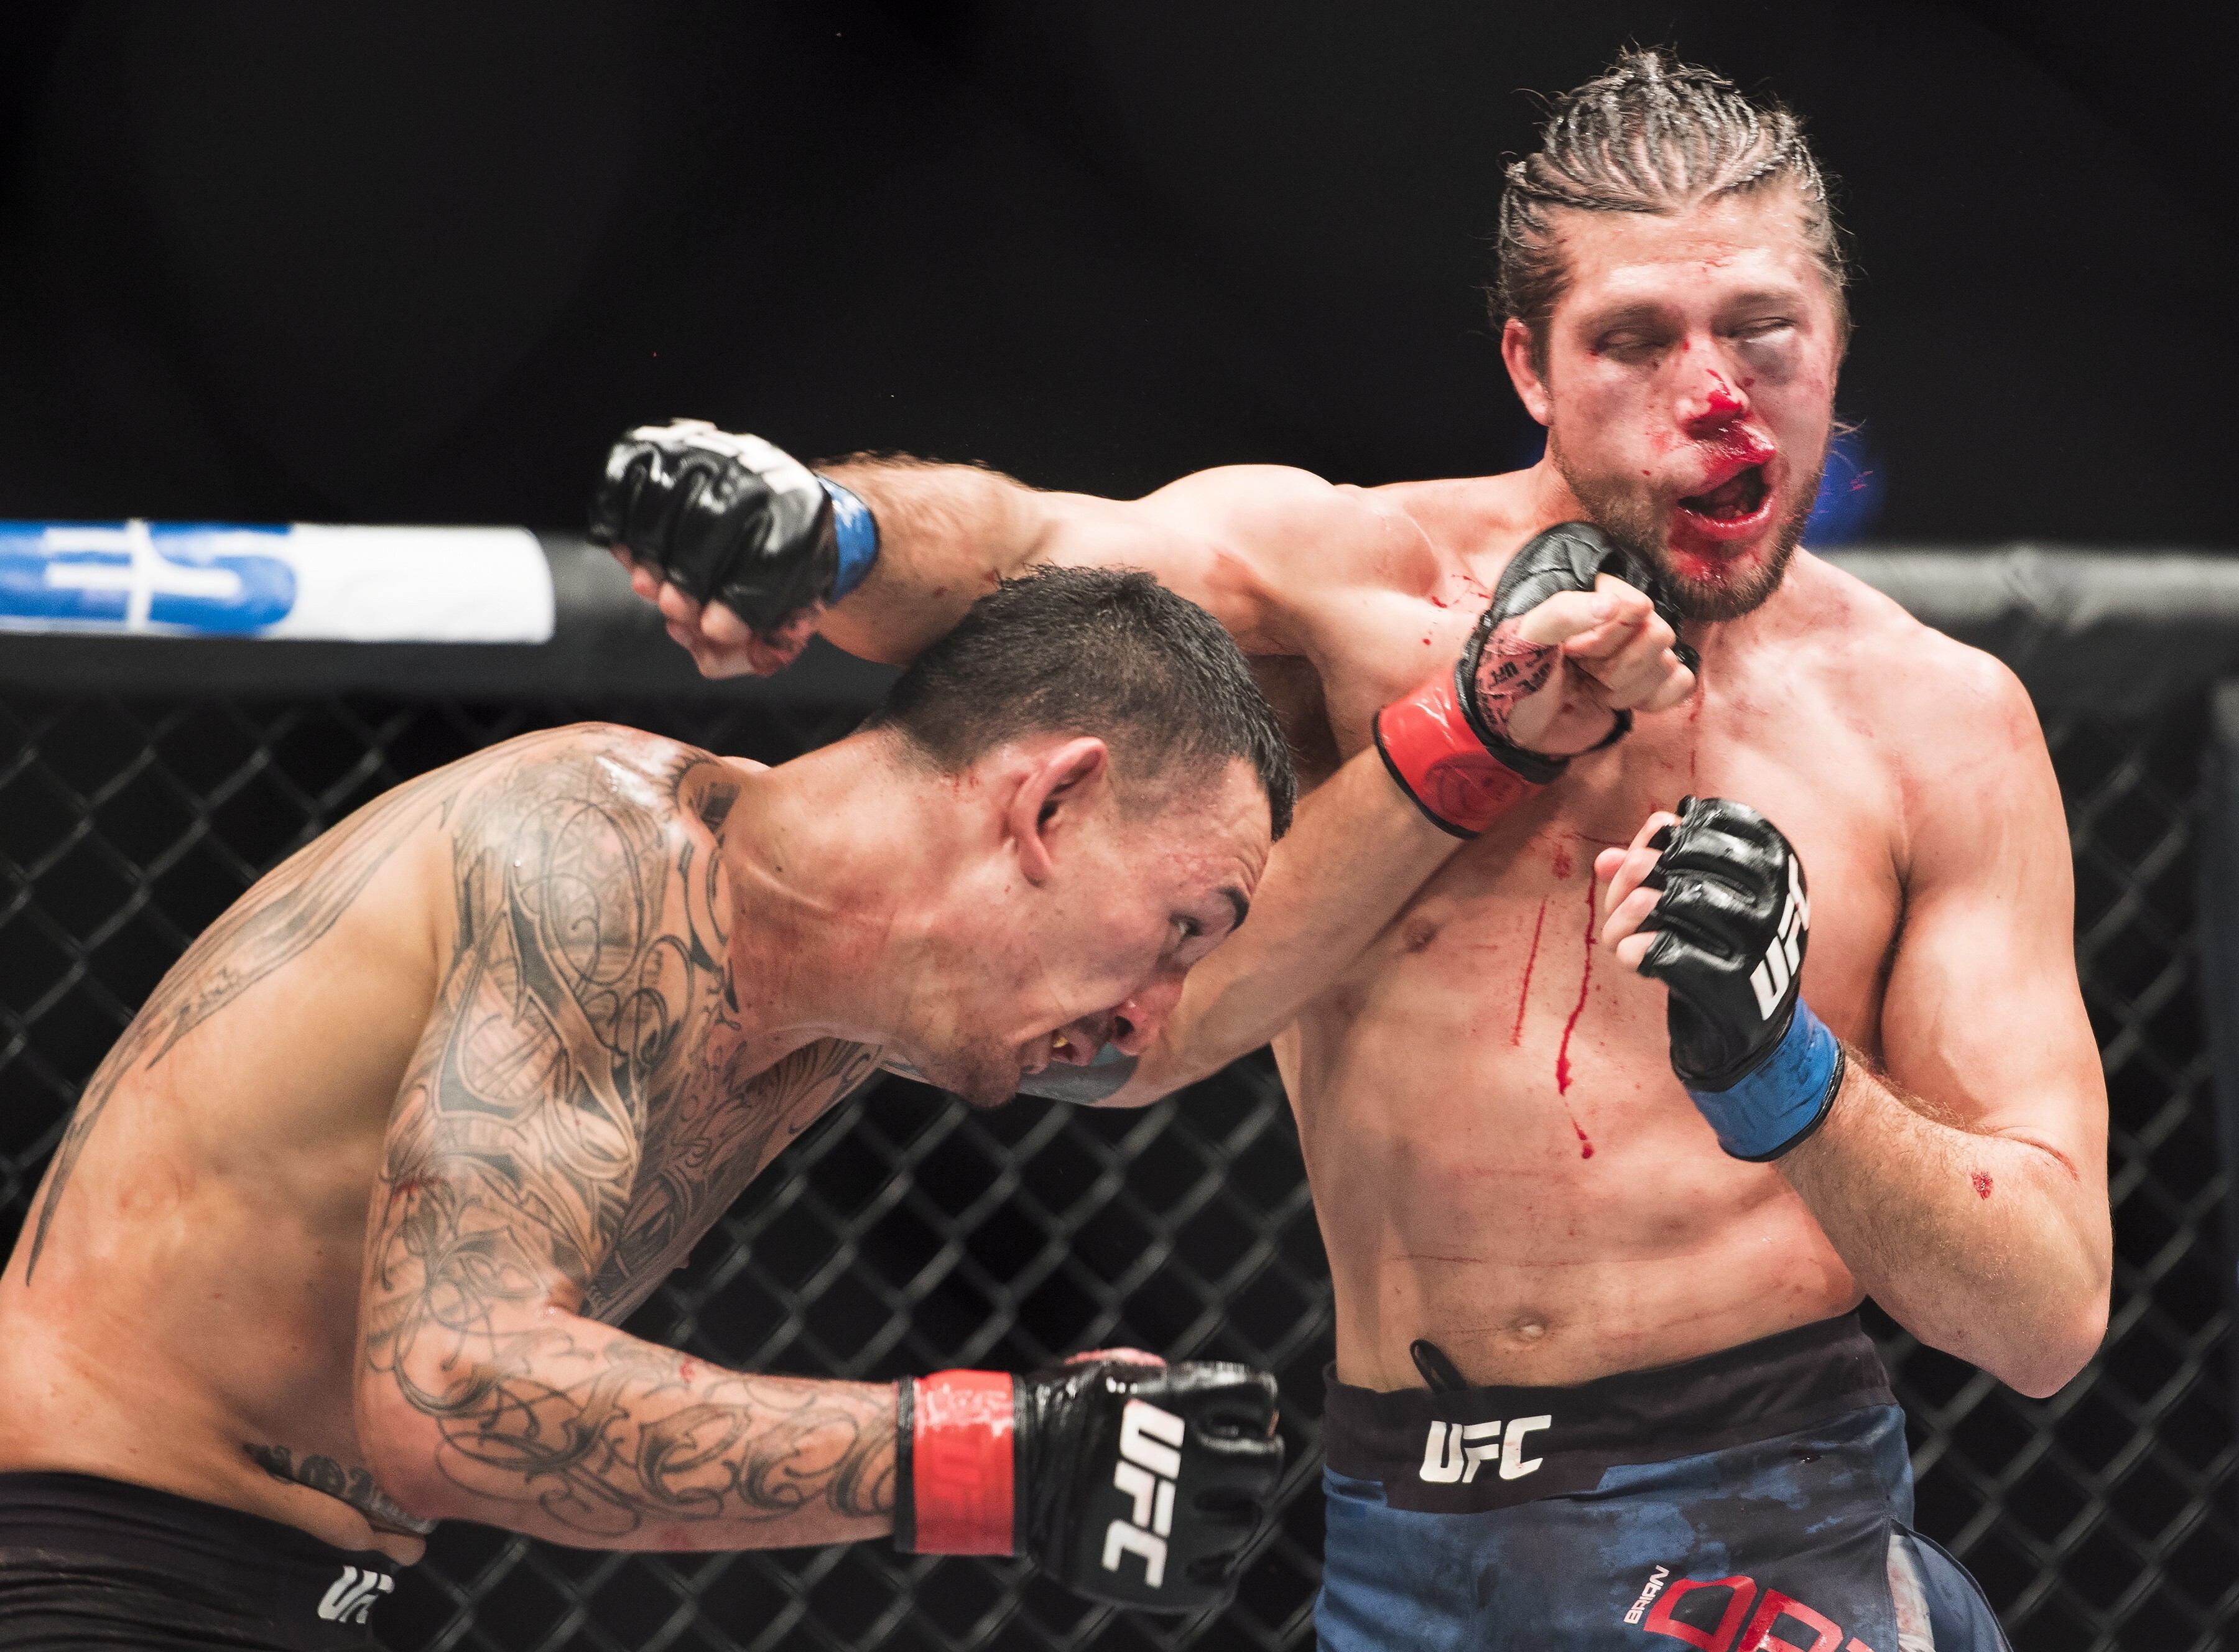 Max Holloway punches Brian Ortega en route to retaining his featherweight title via TKO on a medical stoppage at UFC 231. Photo: AP